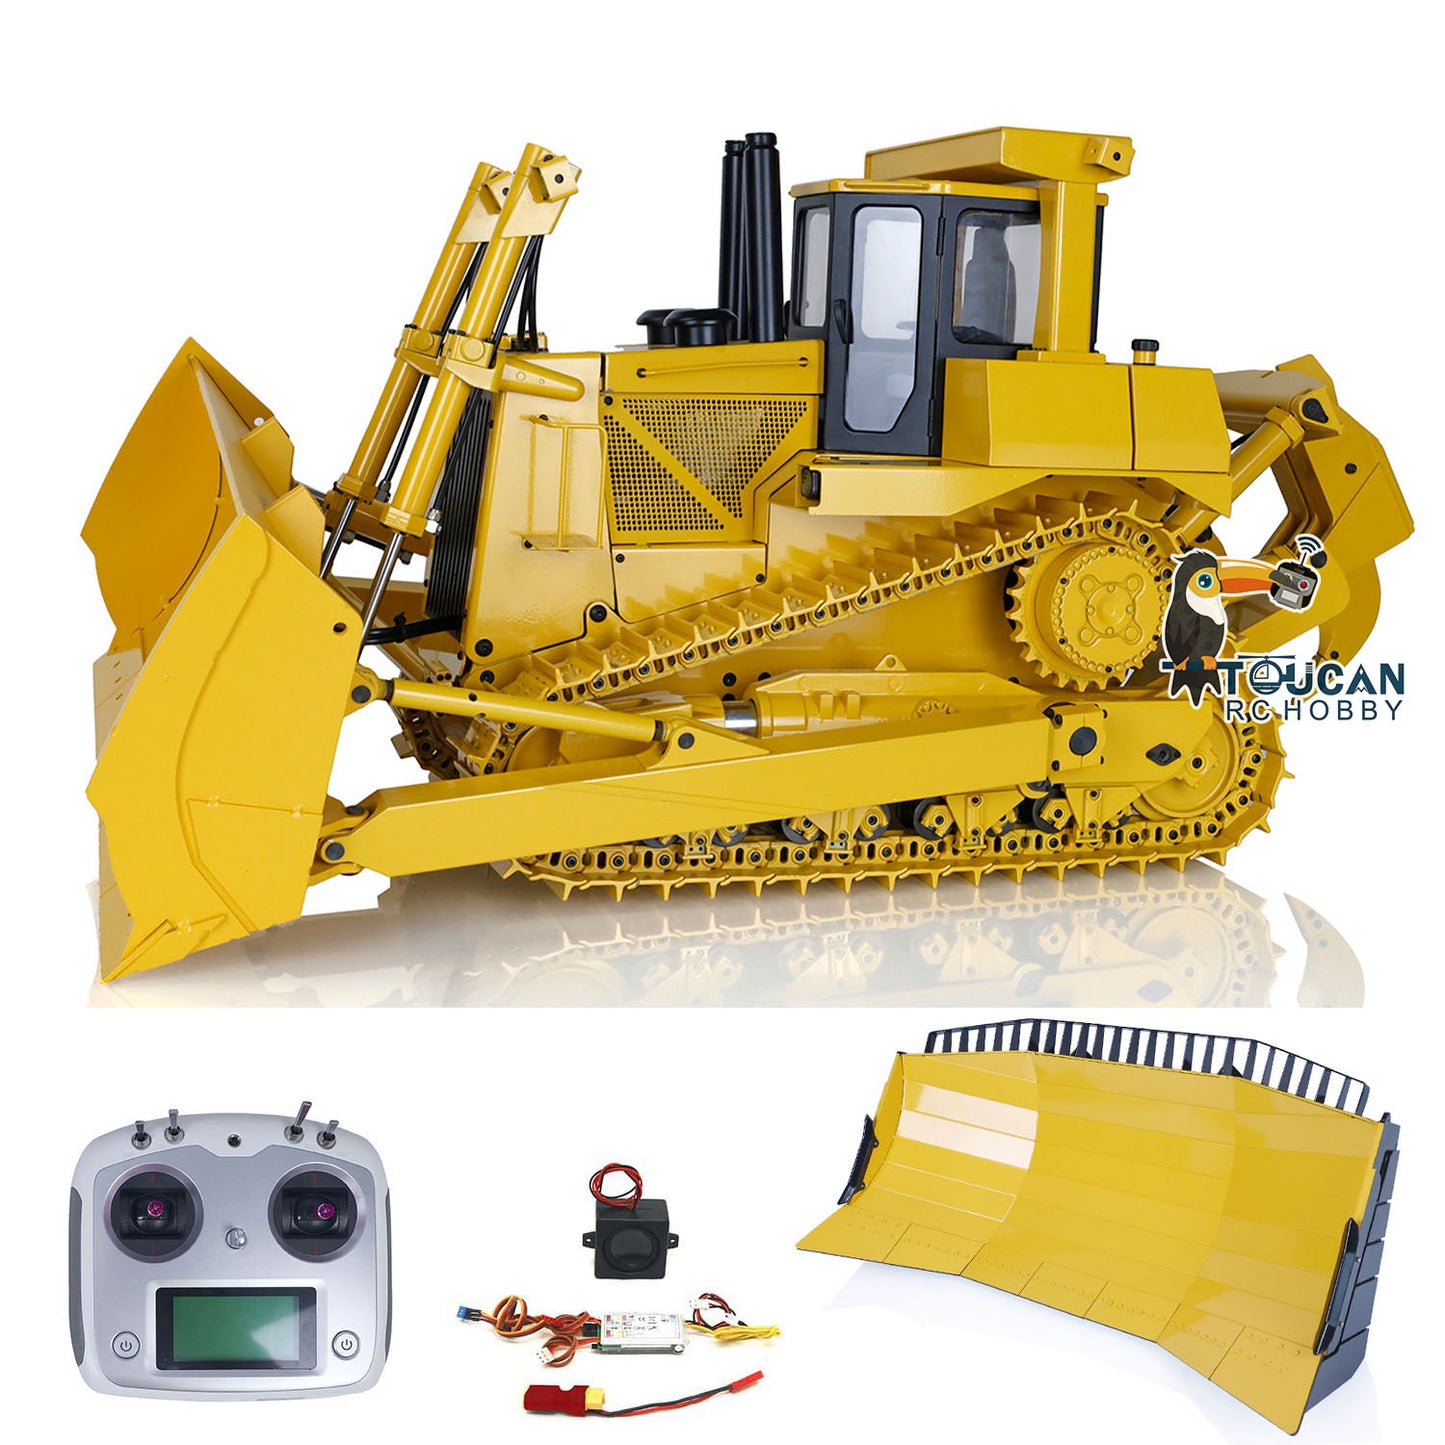 JDModel 1/14 MetalHydraulic RC Bulldozer Remote Controlled Construction Vehicles DXR2 with Upgraded Blade Model